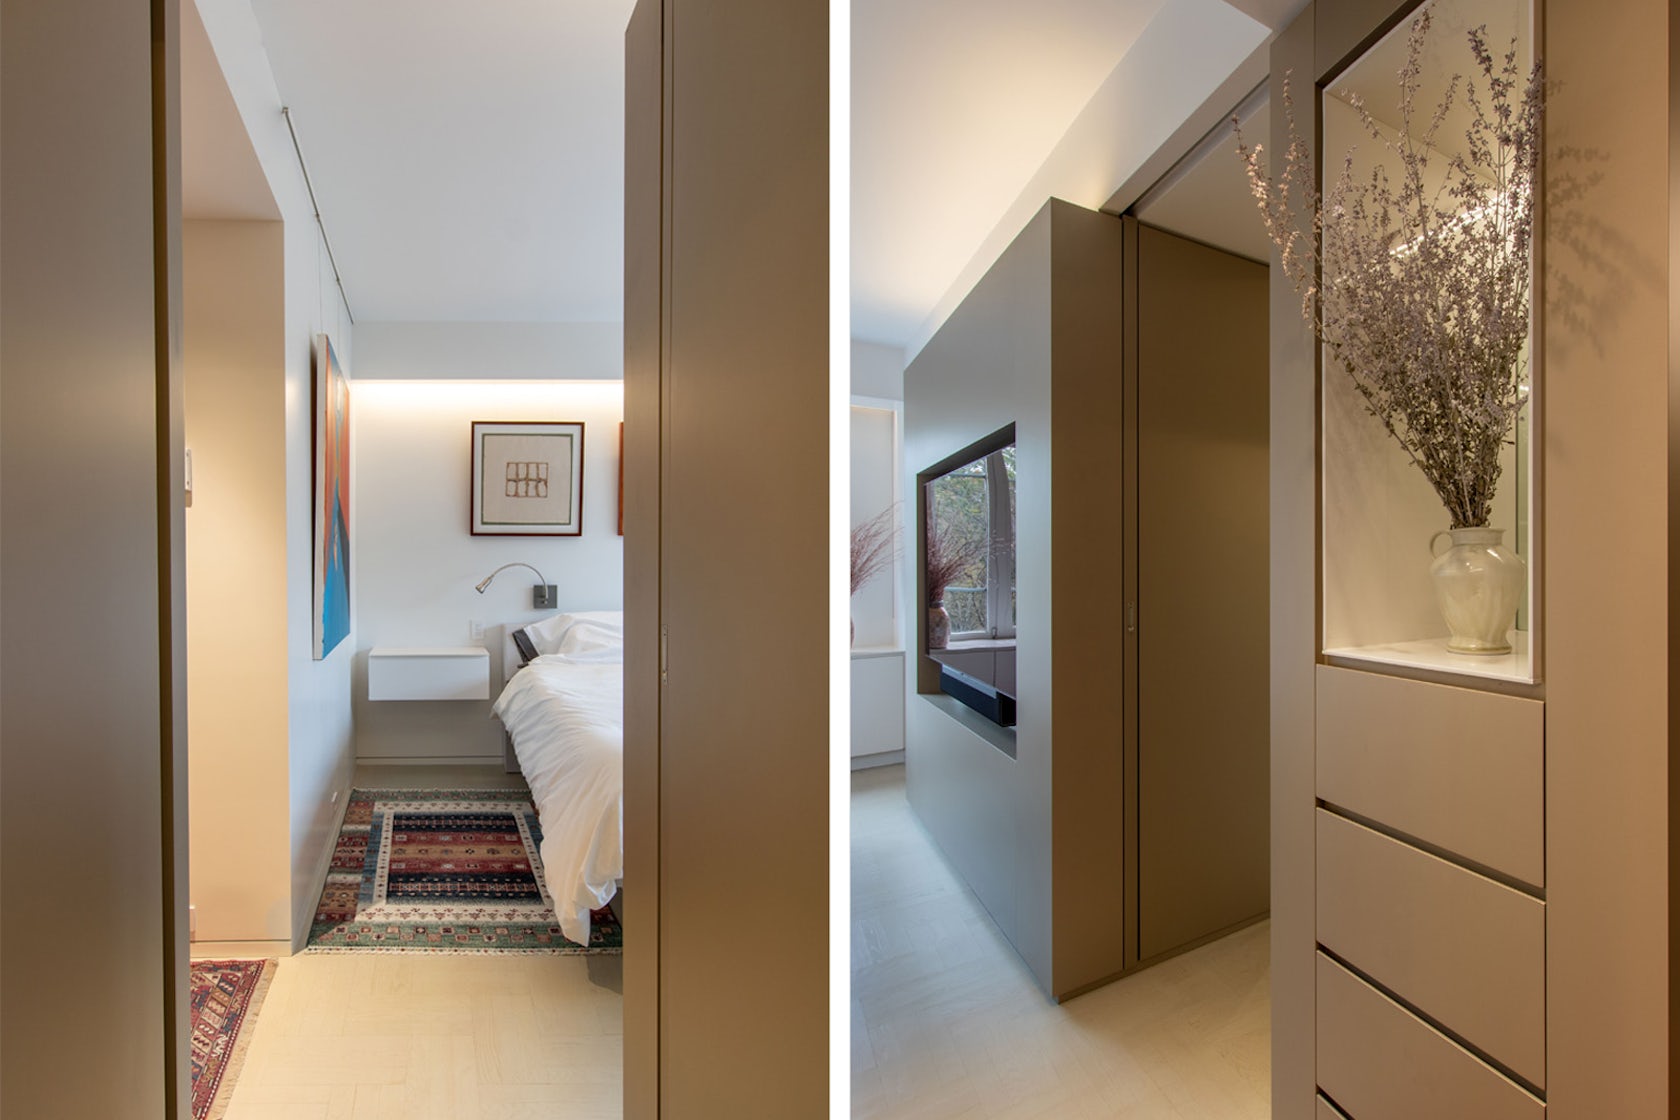 Fifth Avenue Pied-À-Terre by Resolution: 4 Architecture - Architizer